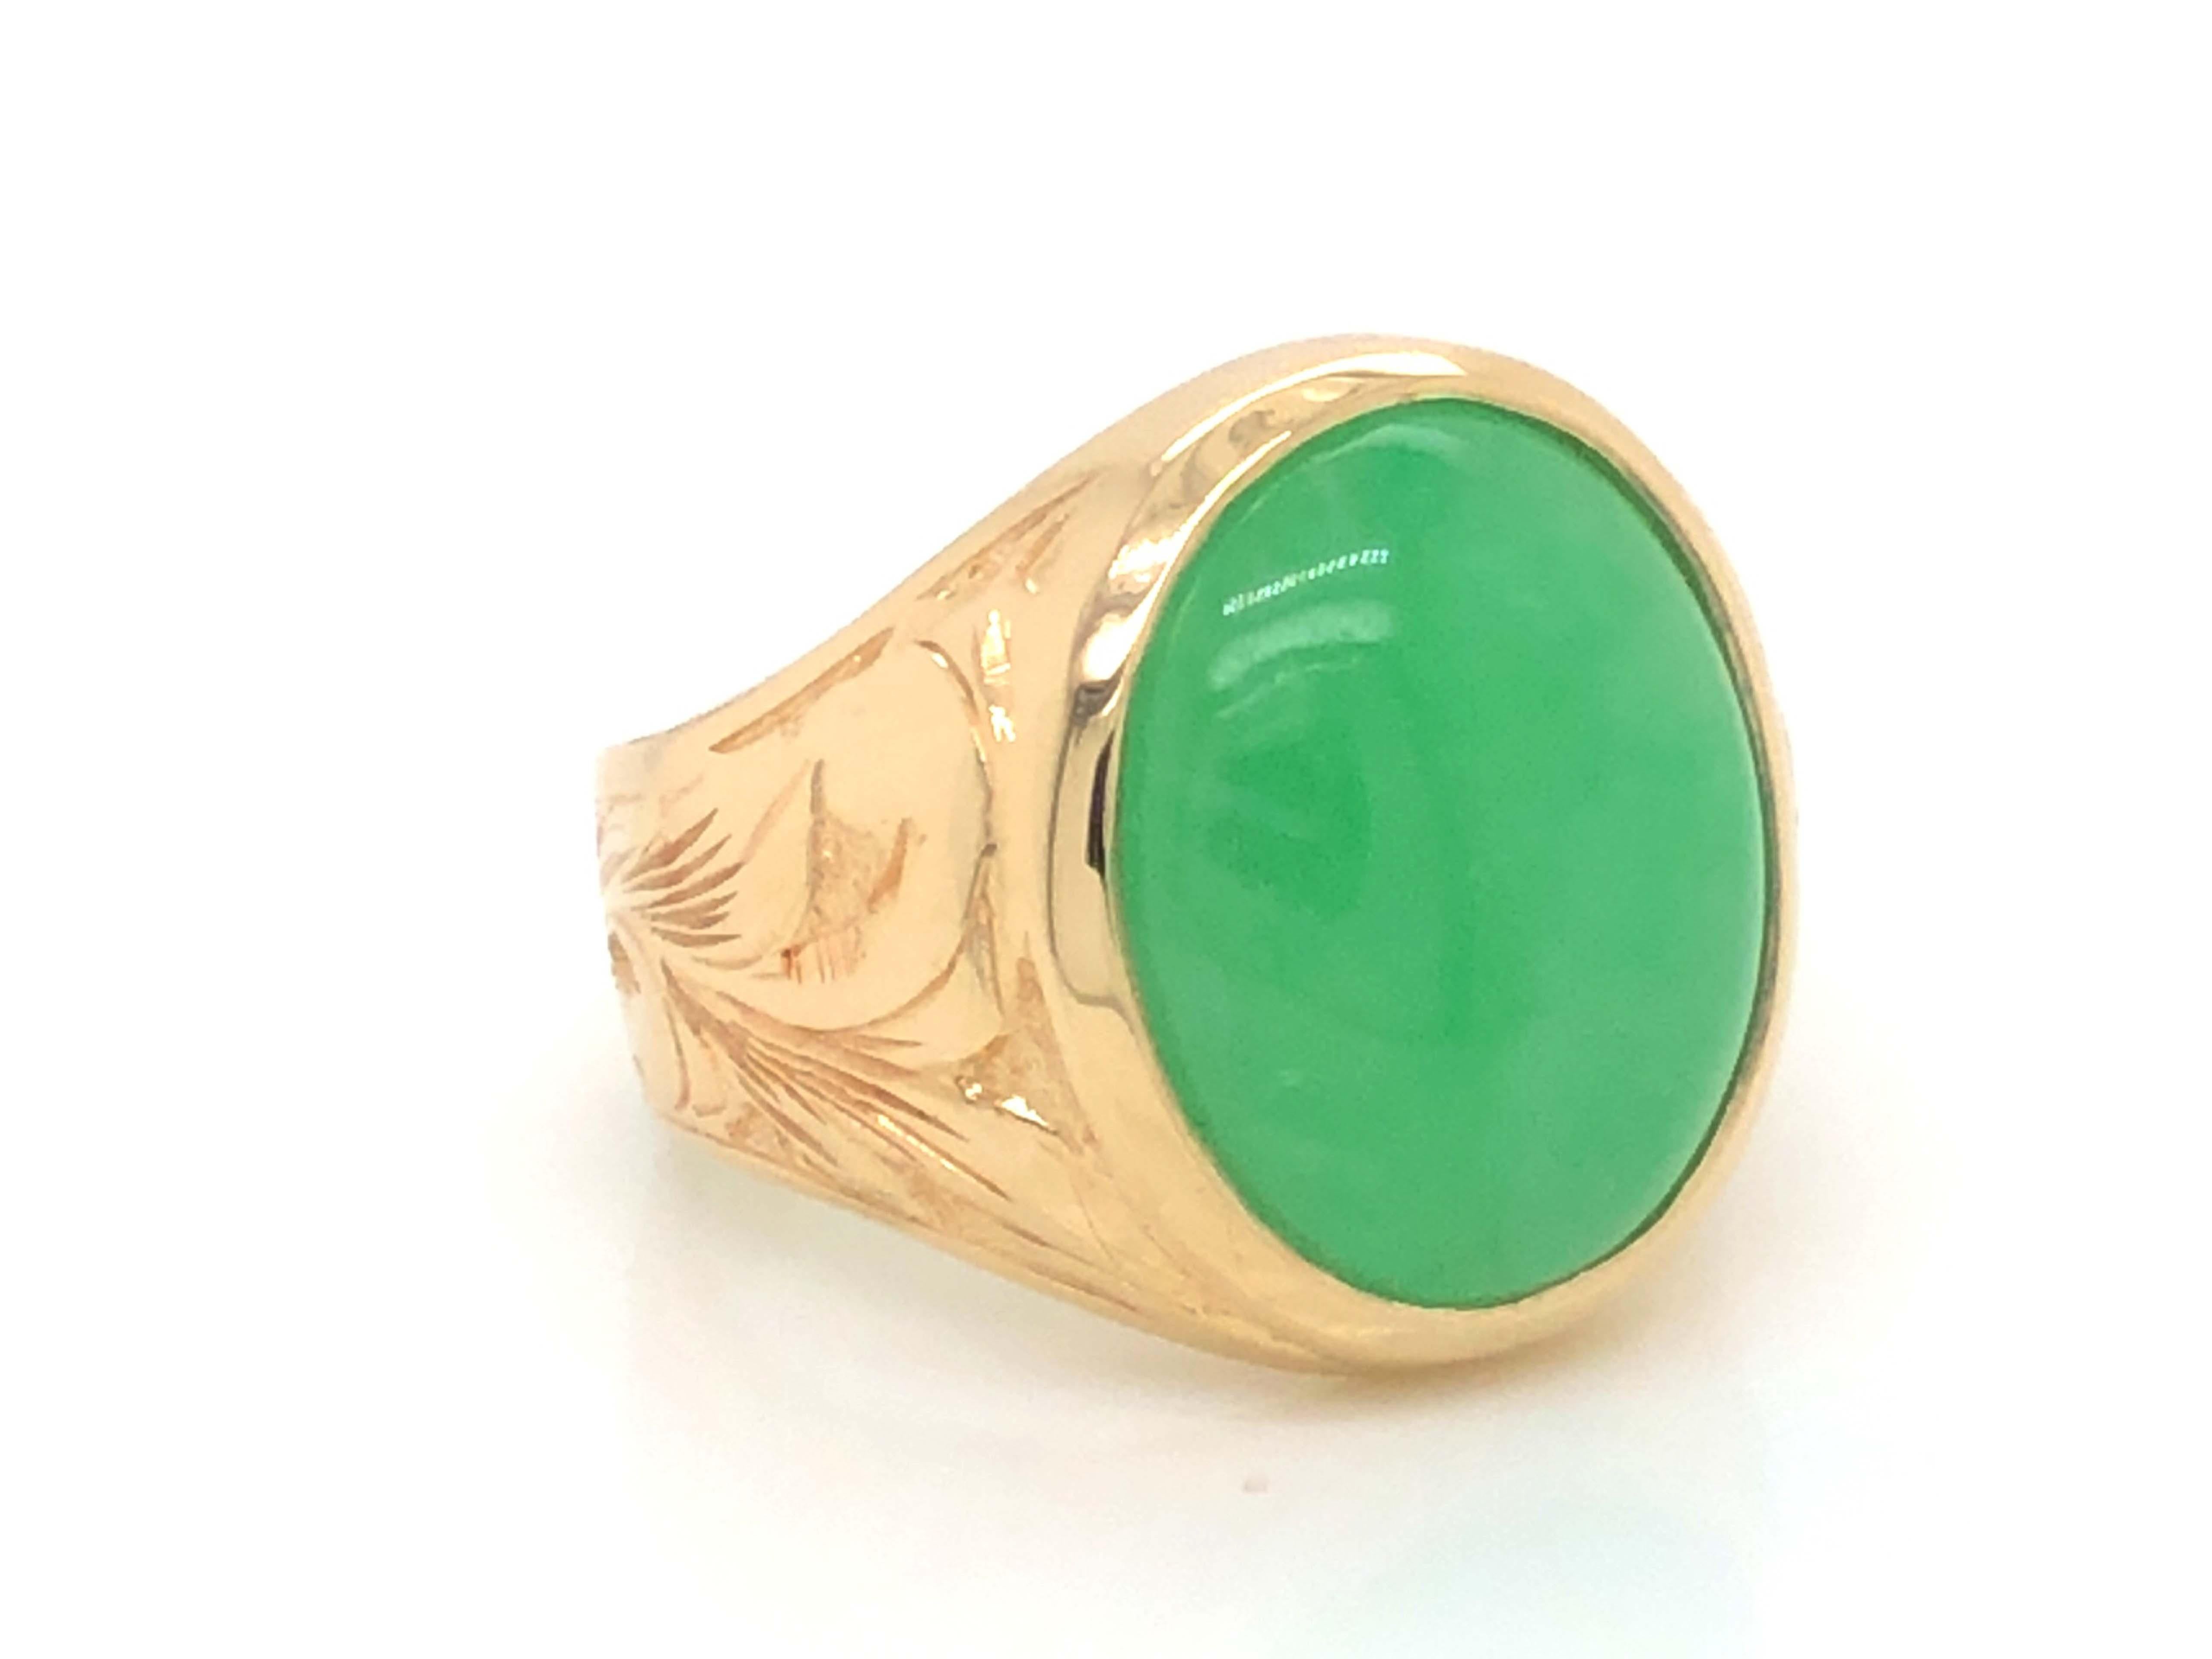 Magnificent vintage oval cabochon green jadeite jade ring, in 14k yellow gold. The beautiful apple green Jade is bezel set and measures approximately 15.89 mm x 13.02 mm x 5.30 mm. The ring has a tapered shank with a high polish finish and engraved